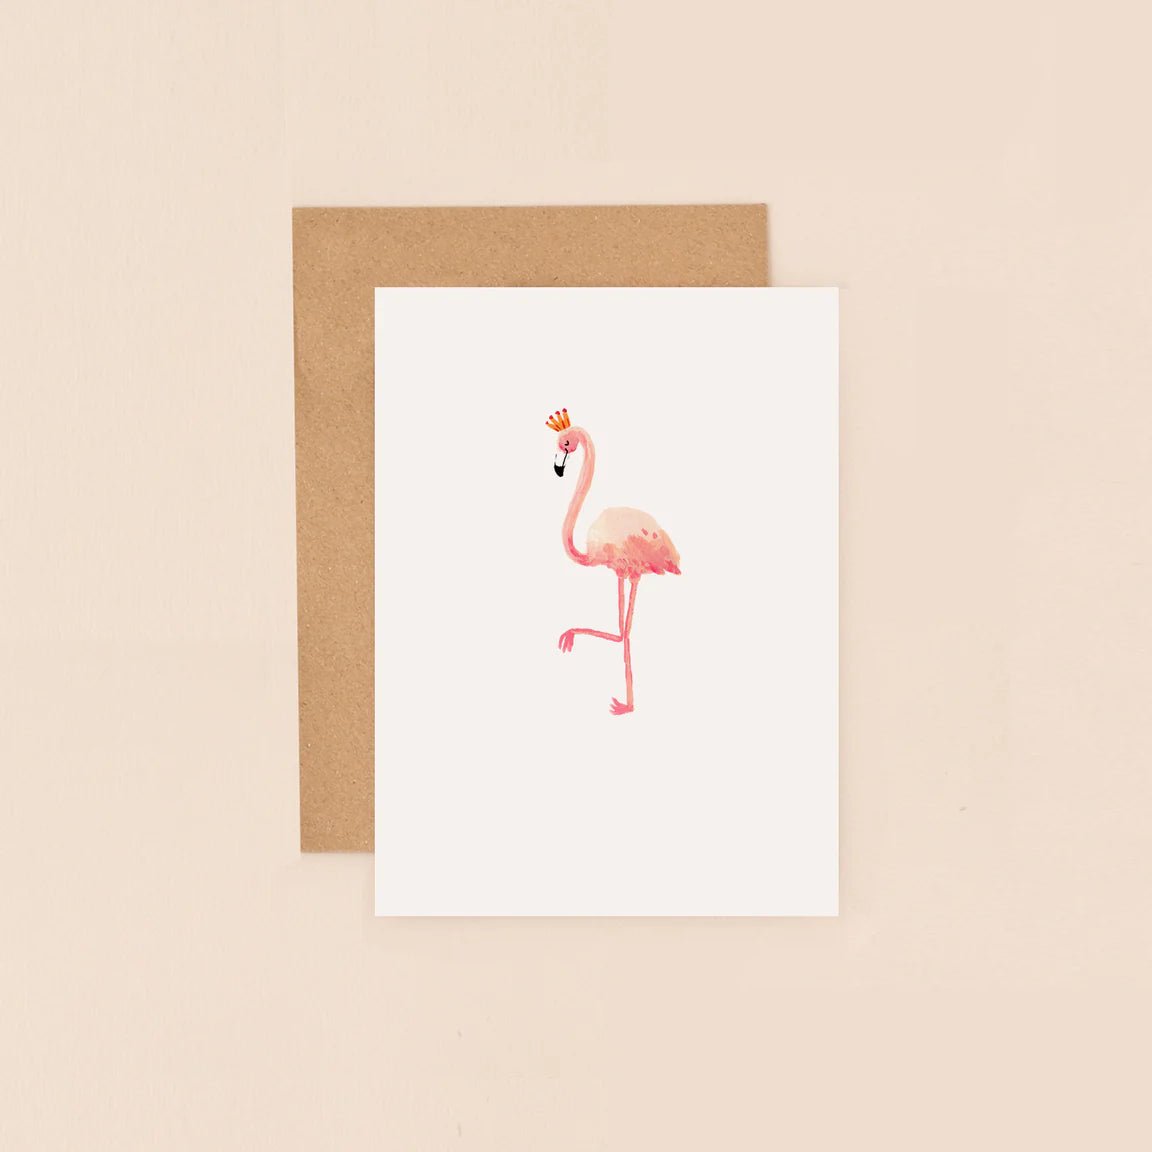 Fabulous Greeting Cards Louise Mulgrew Mini Card Flamingo With Crown Card by Weirs of Baggot Street